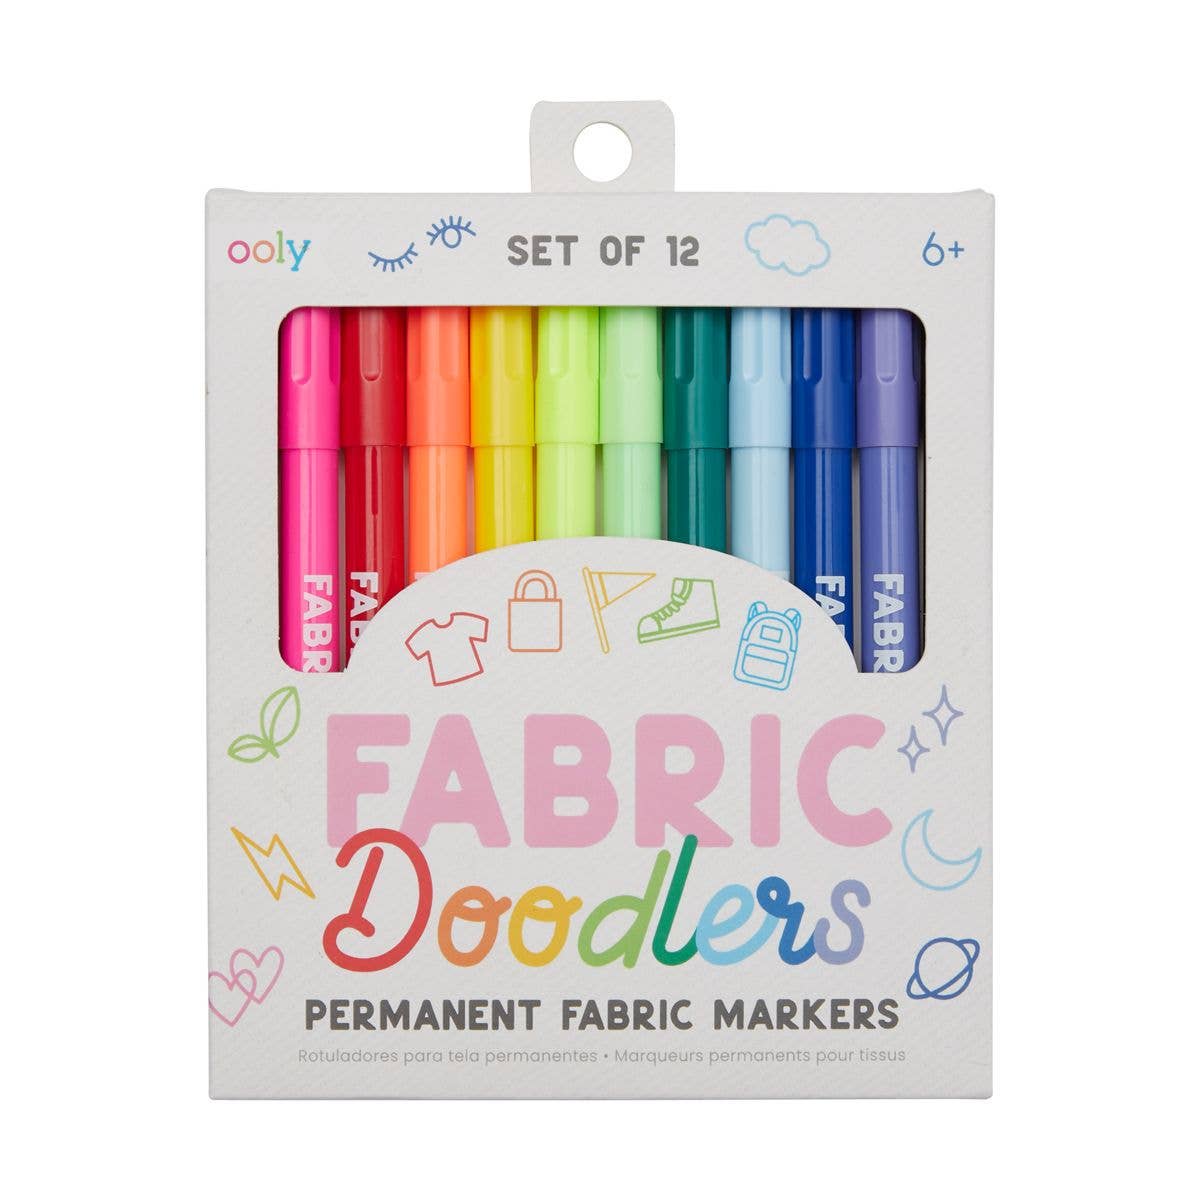 Fabric Doodlers Markers - Set of 12 - Einstein's Attic